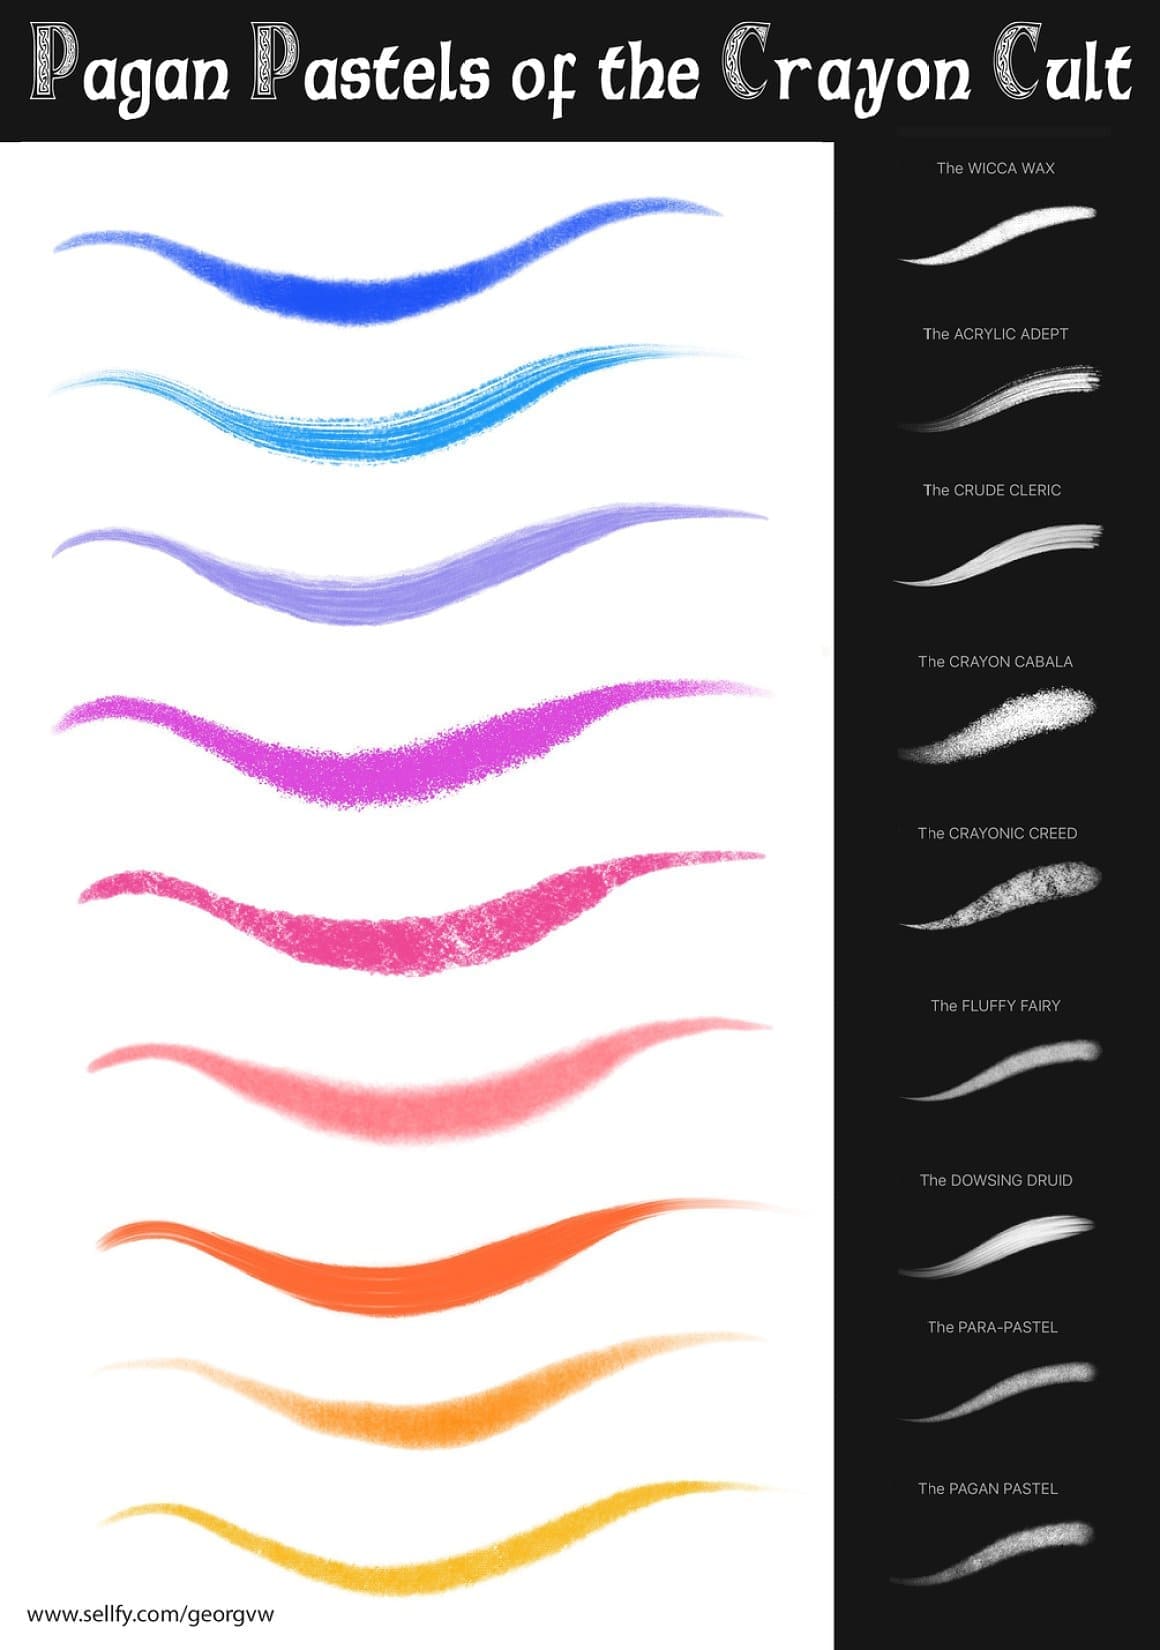 Blue, pink and orange stripes are drawn on a white background.